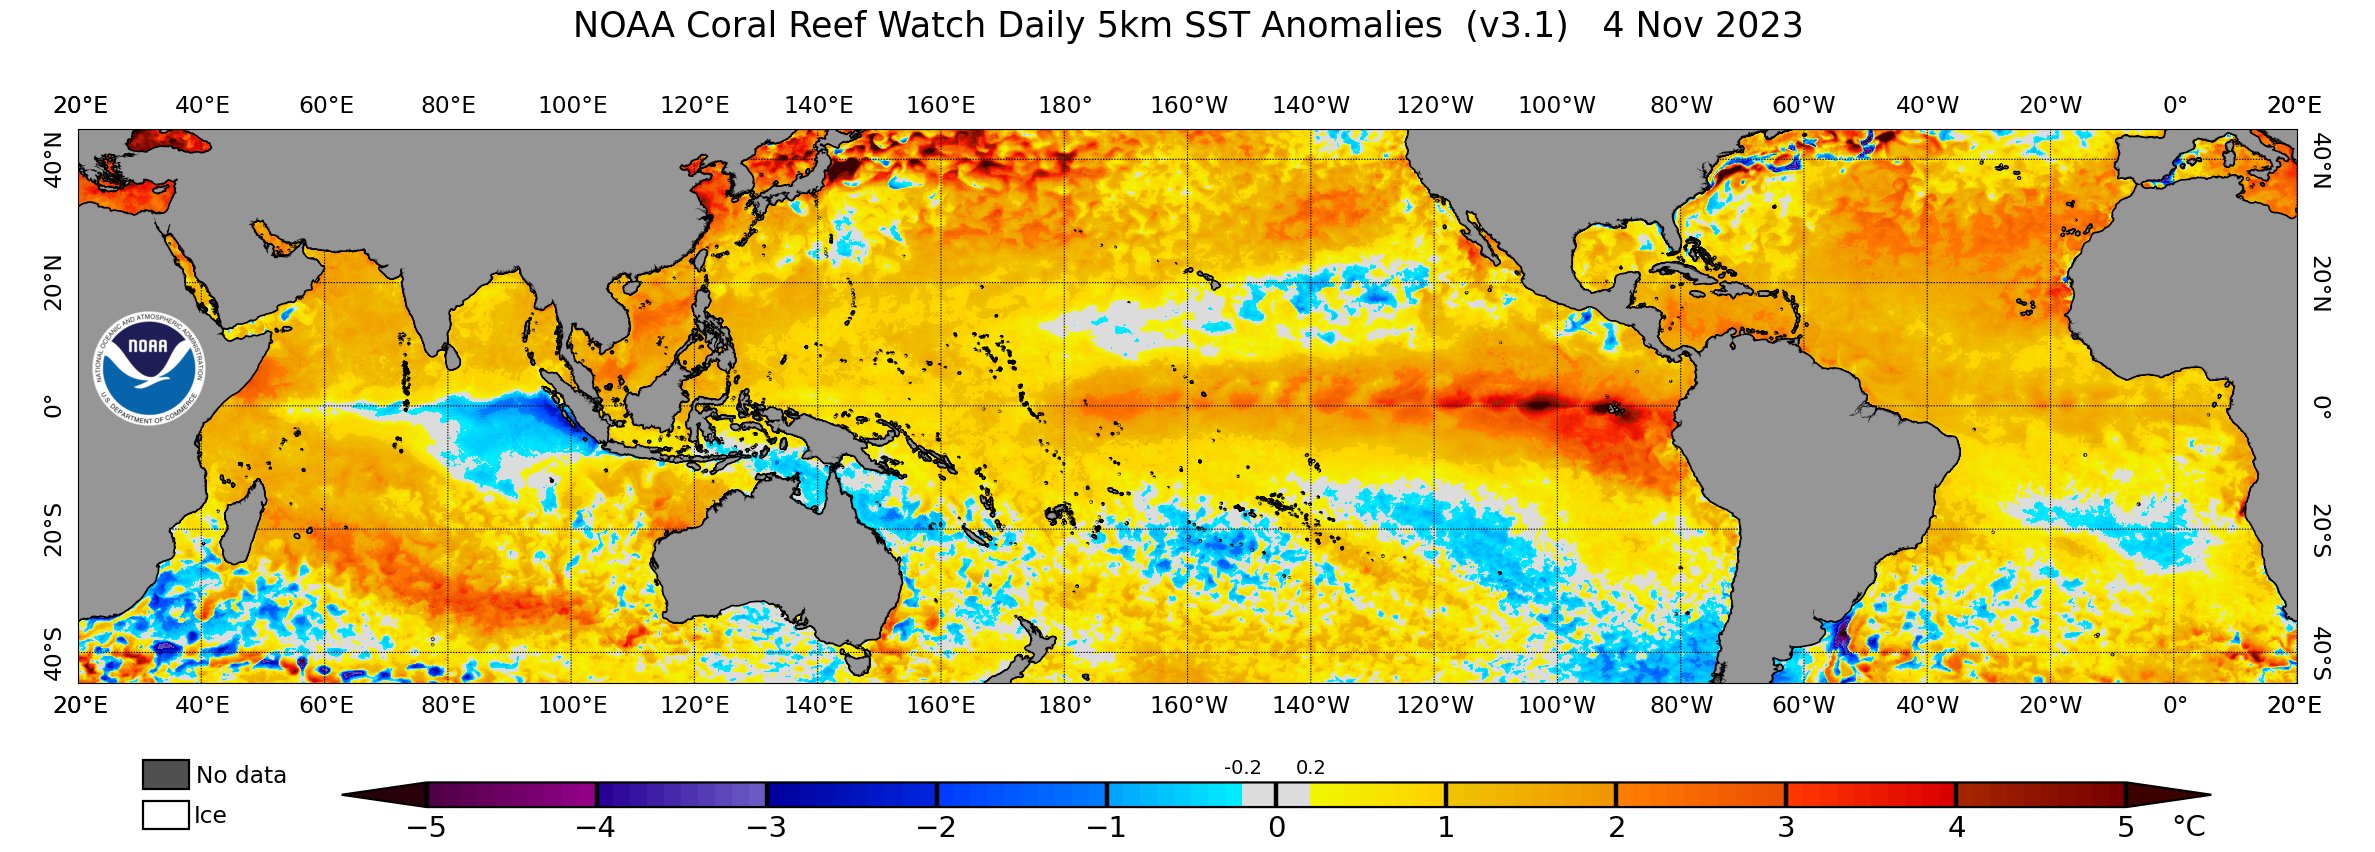 Sea surface temperature anomalies for November 4th from NOAA's Coral Reef Watch.